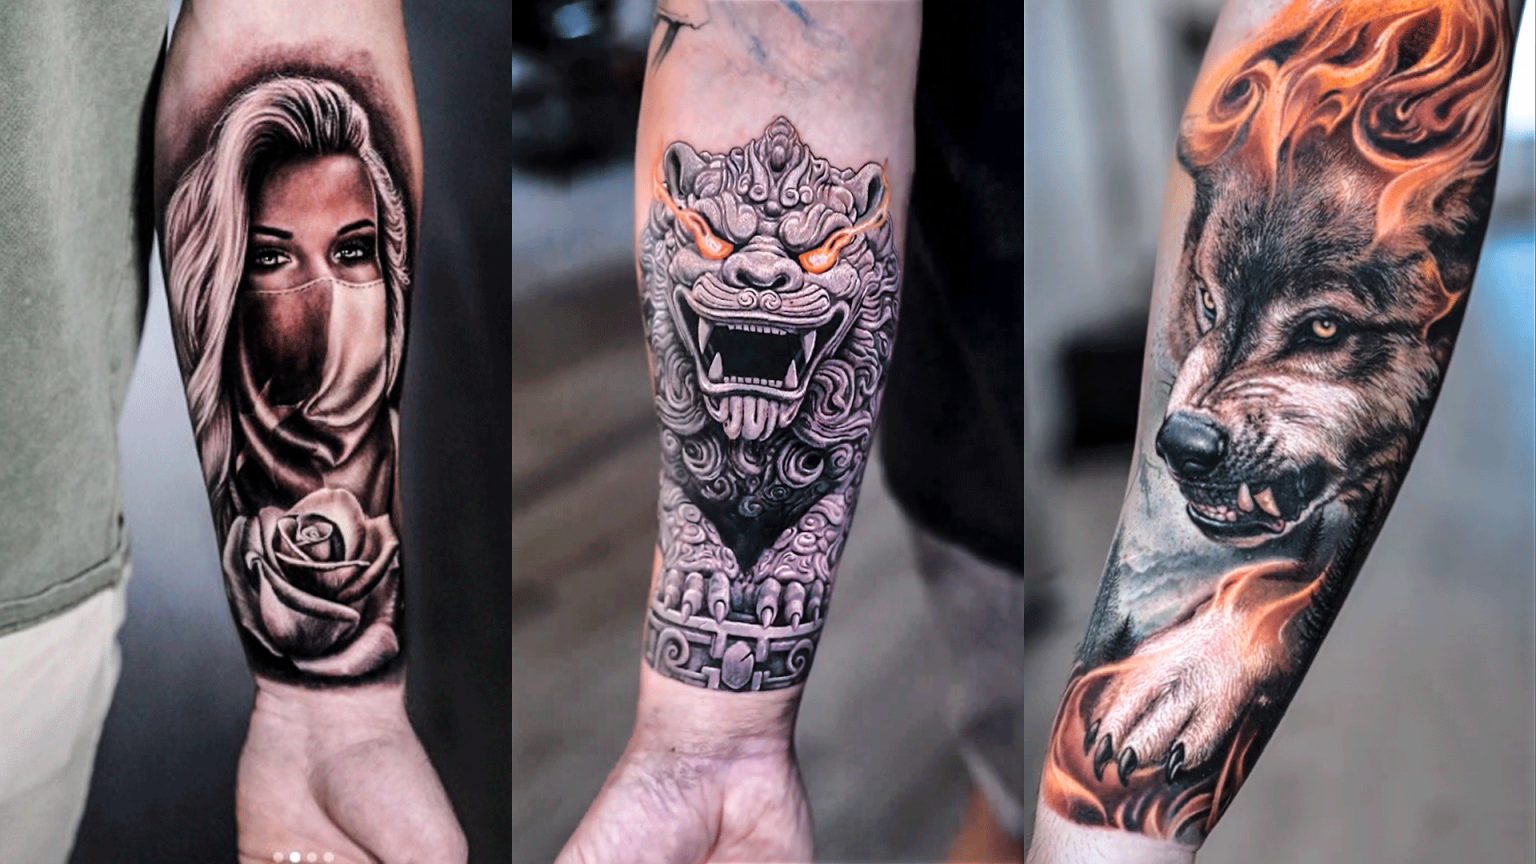 Best Forearm Tattoos Designs and Ideas – Best Tattoo Shop In